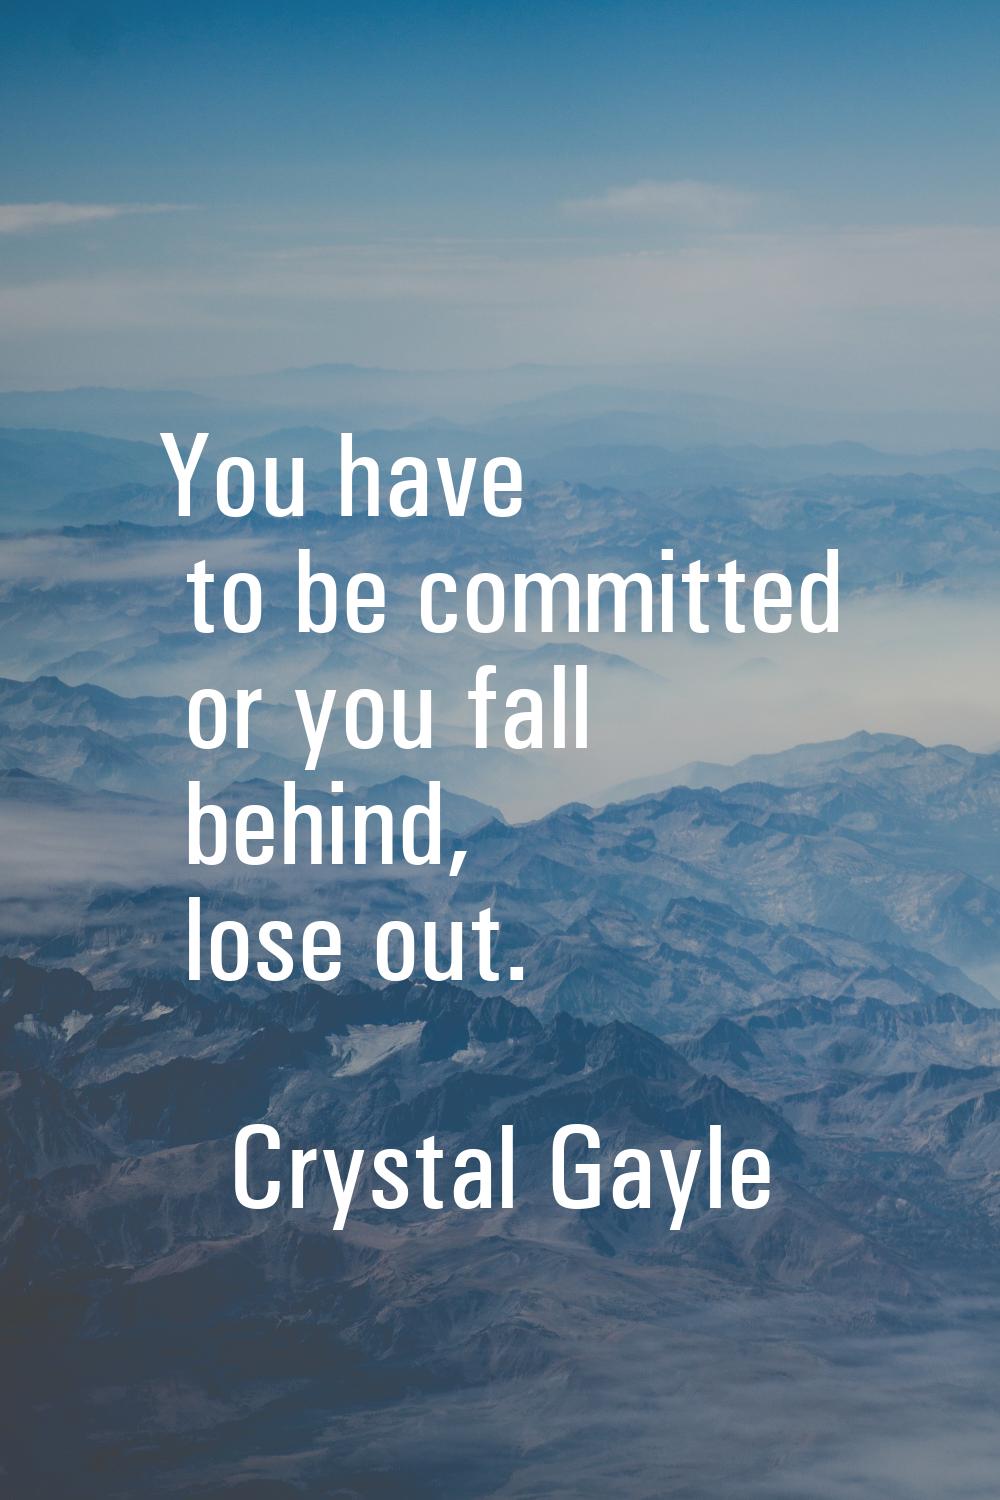 You have to be committed or you fall behind, lose out.